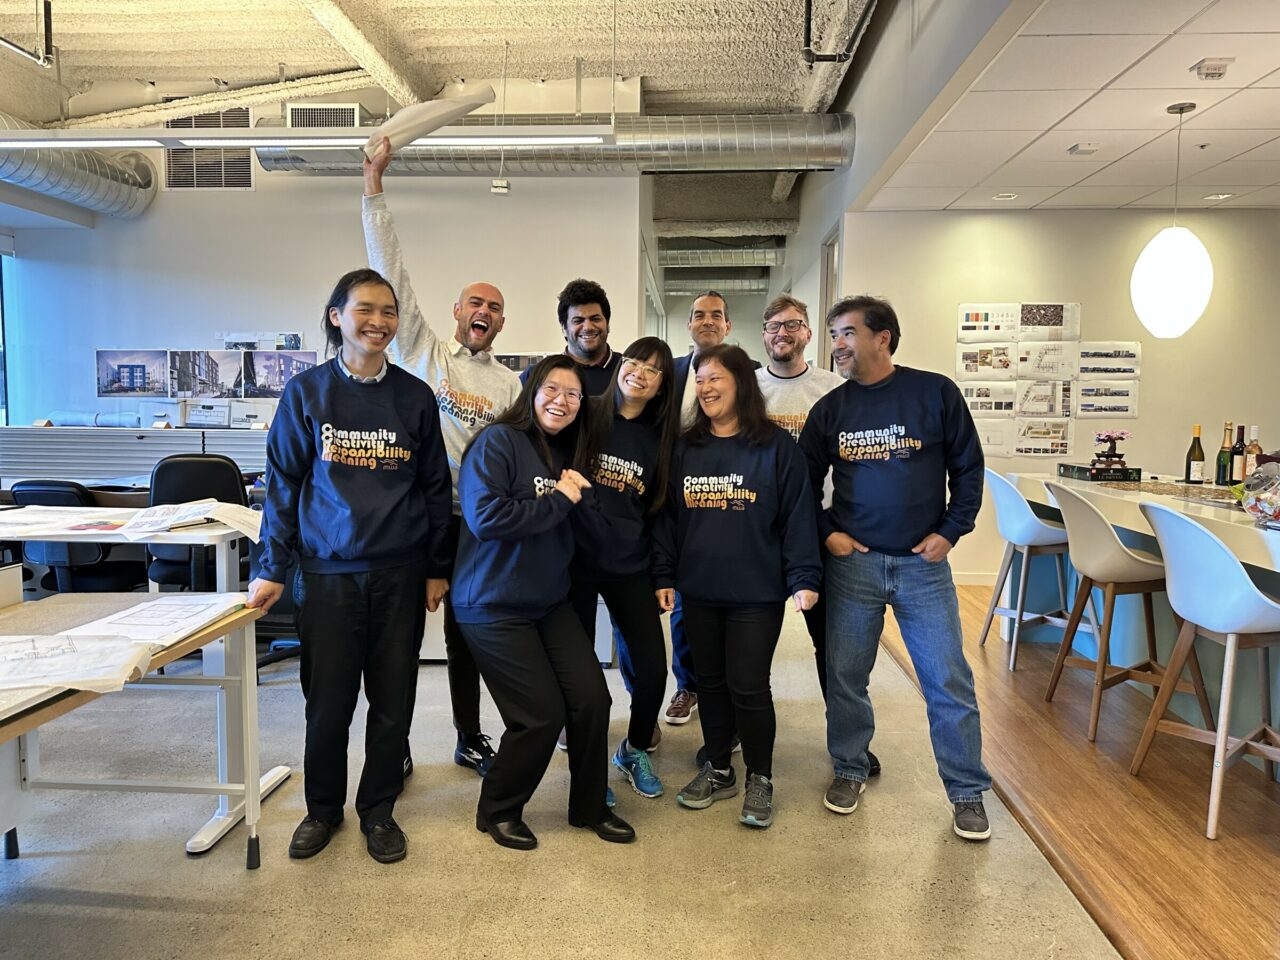 M W A's San Francisco office wearing sweatshirts with their values on them.